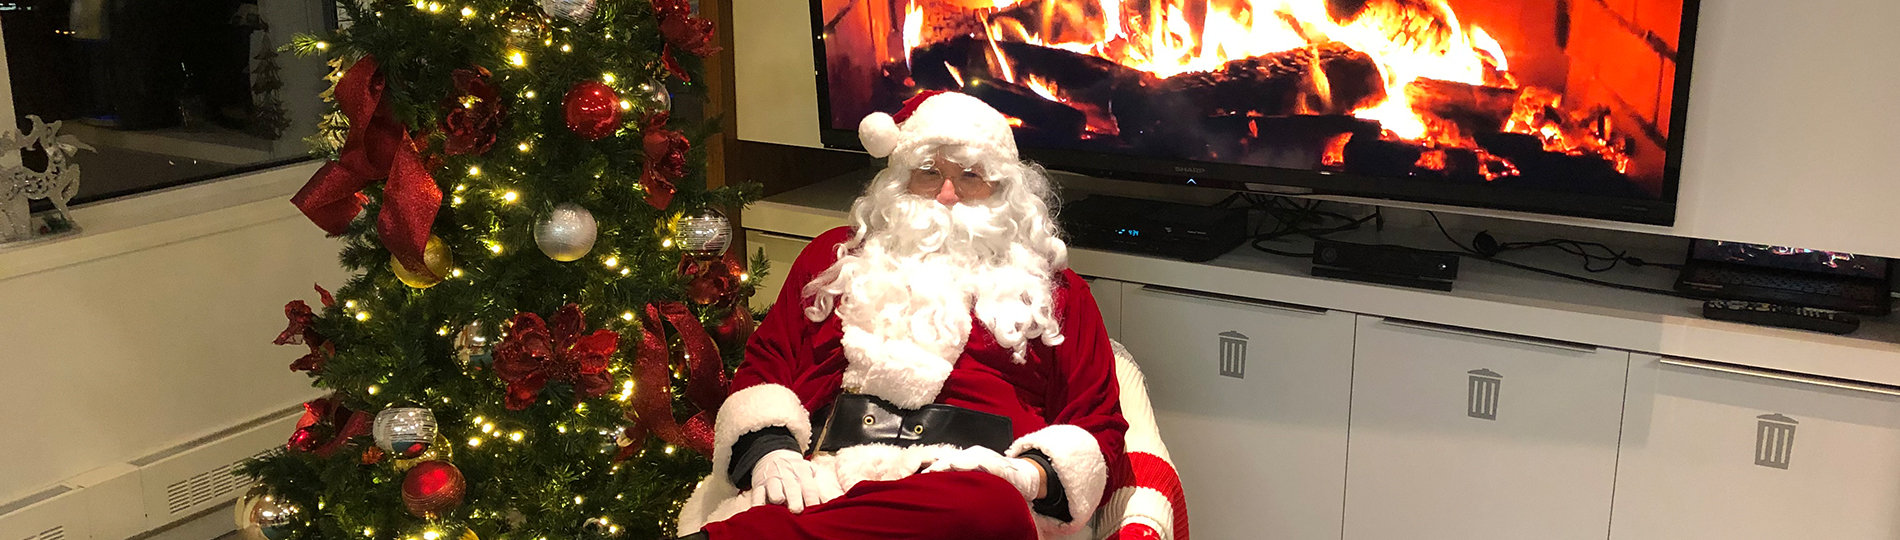 Gilles Garceau dressed as Santa Claus, sitting by digital fireplace and Christmas tree